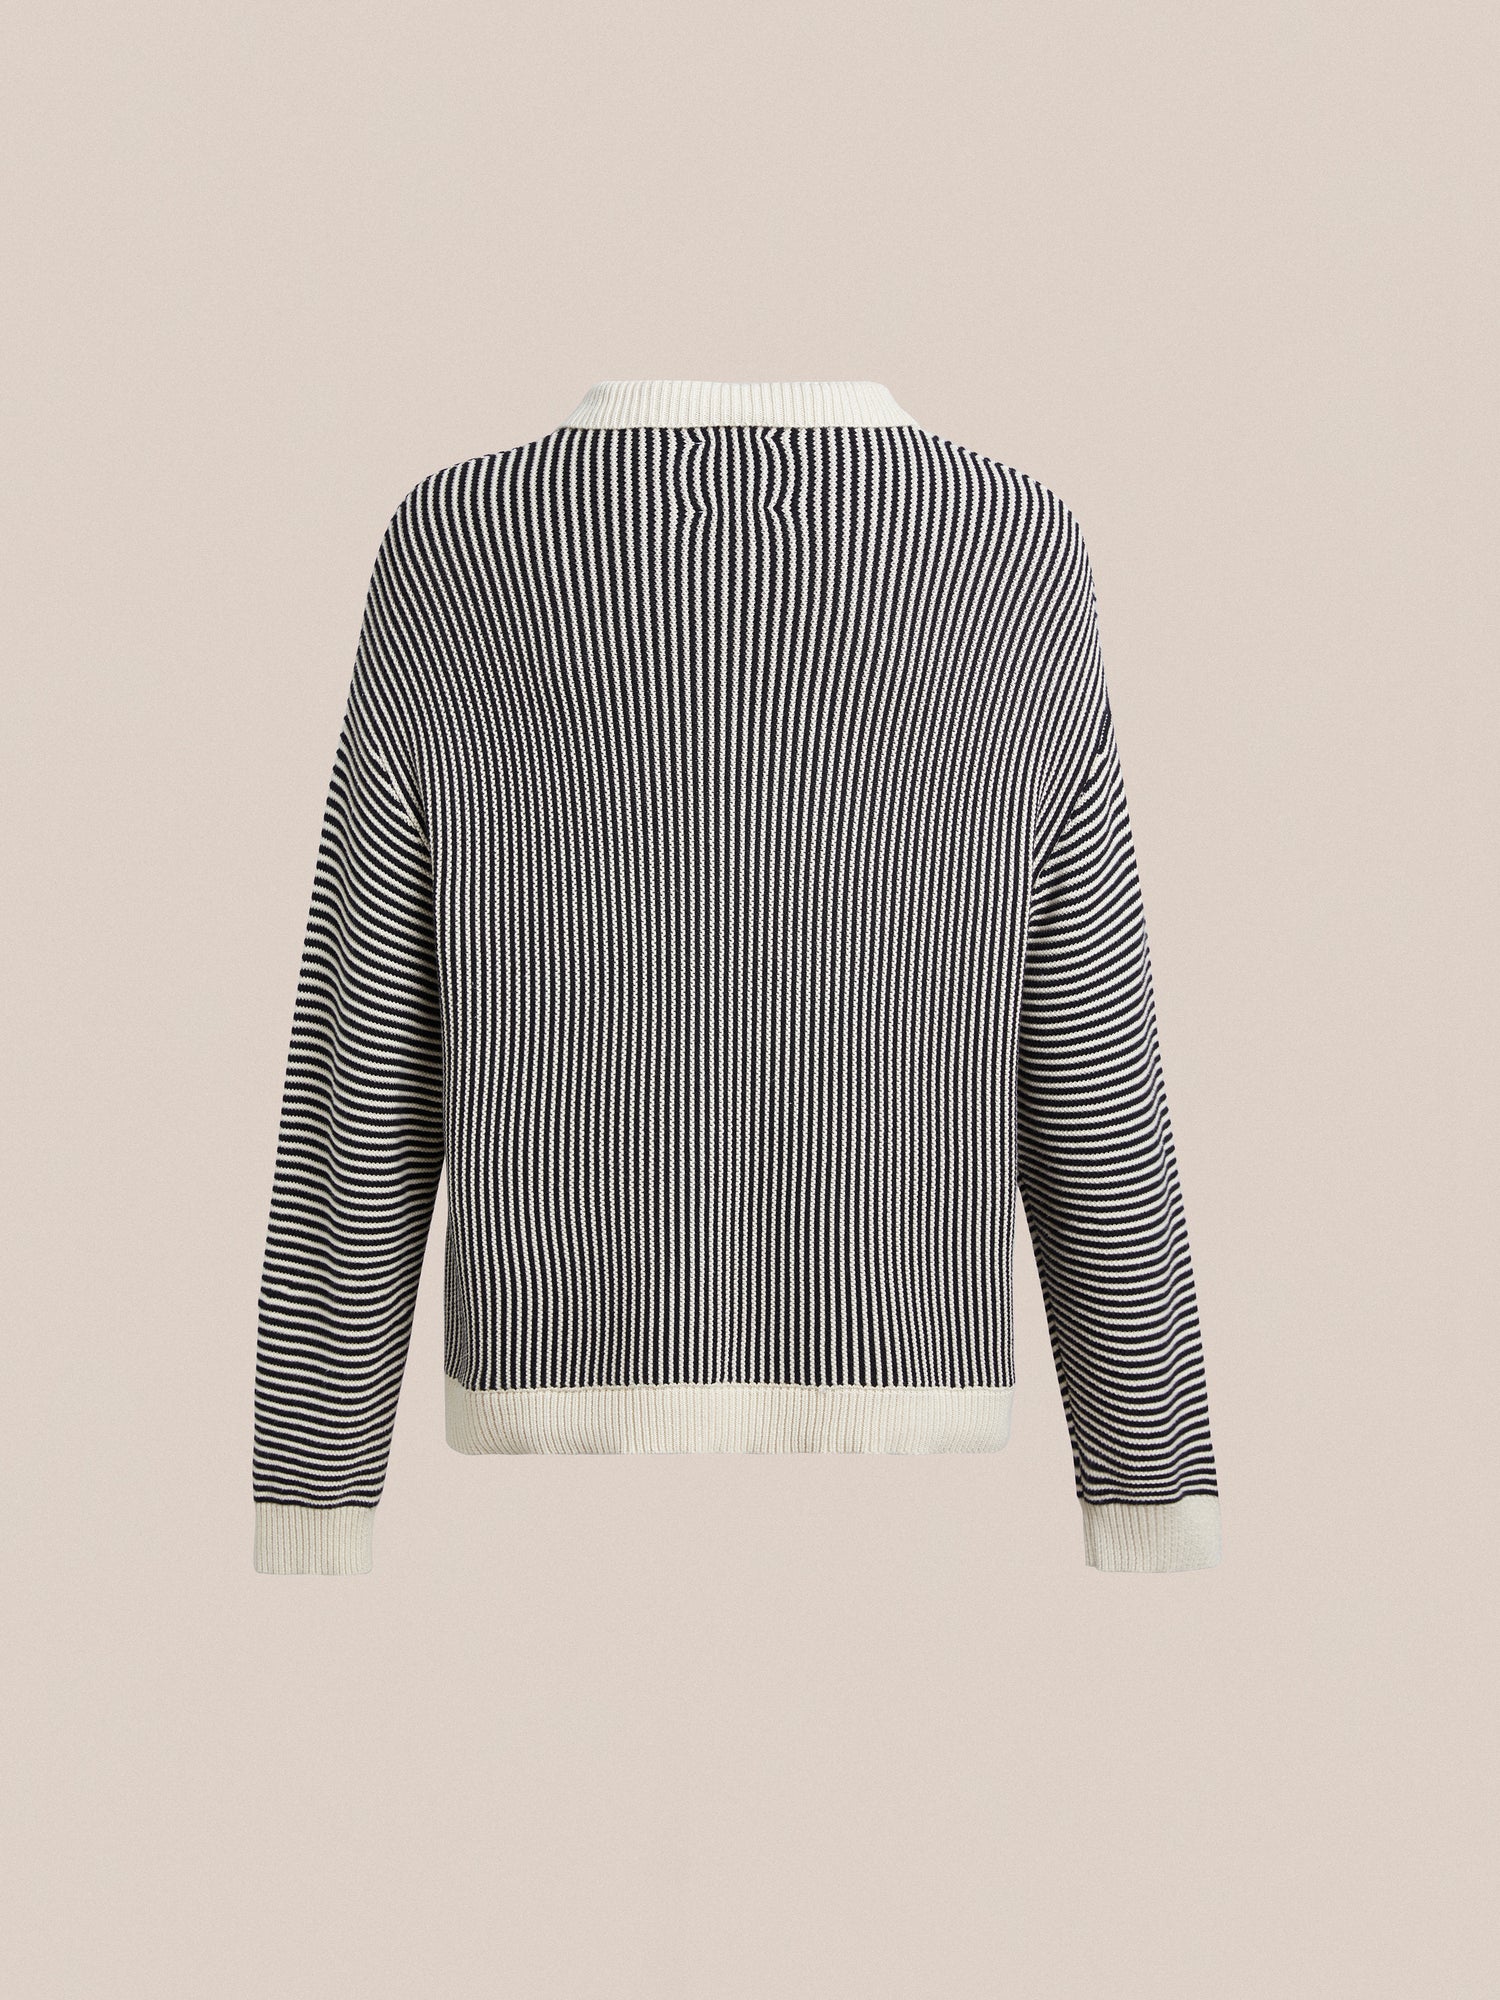 A women's Tabas Tie Knit Collared Sweater in black and white with intricate knit patterns by Found.